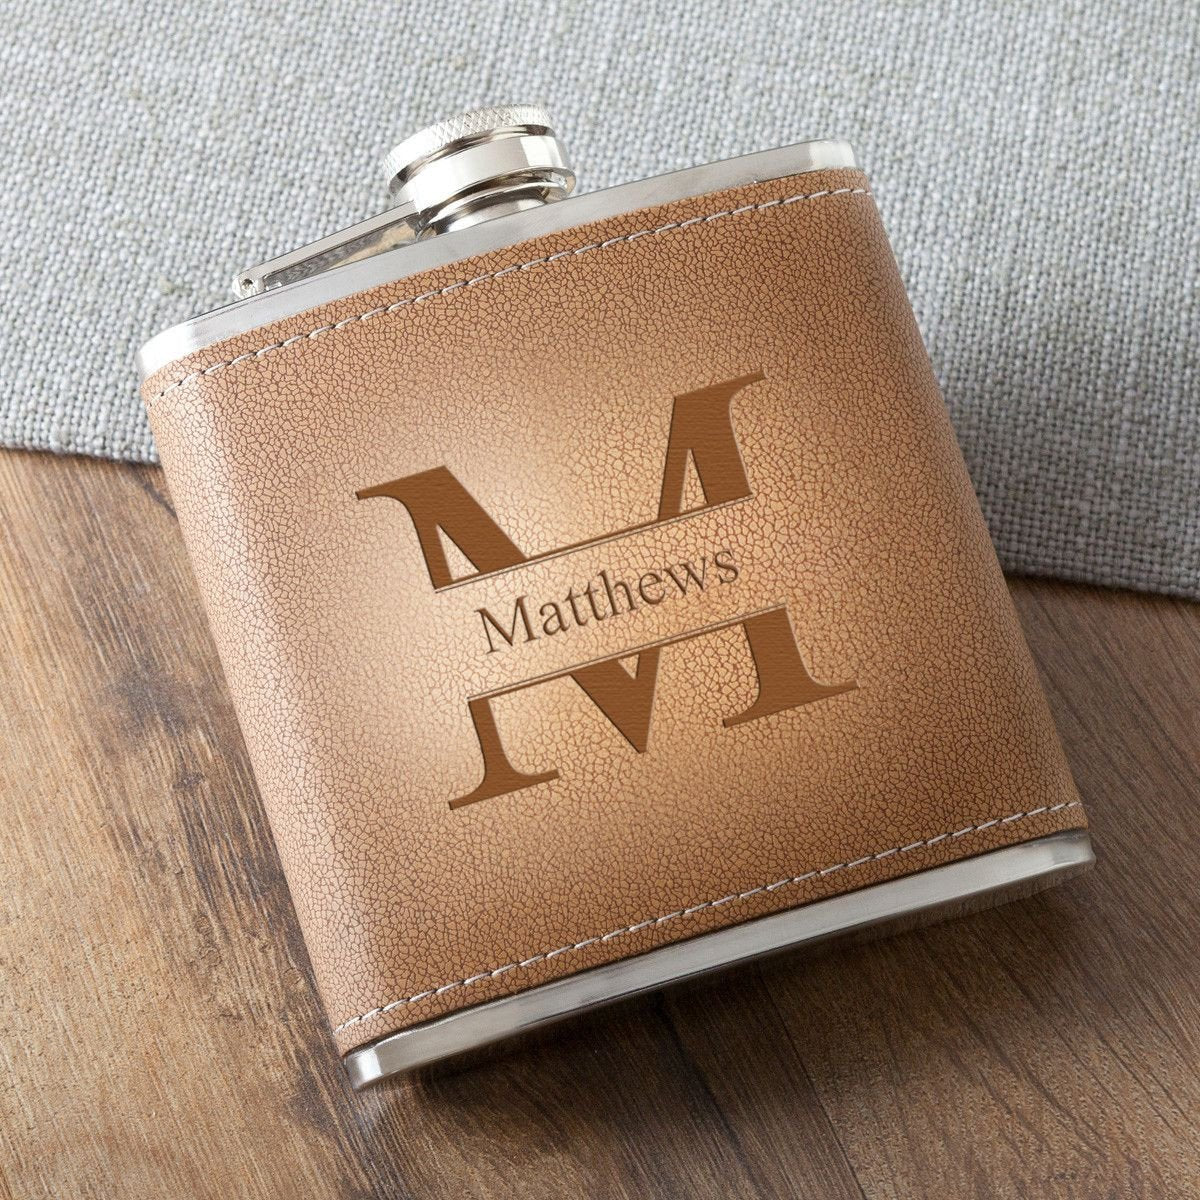 Personalized Durango Monogrammed 6 oz. Leather Hide Flask